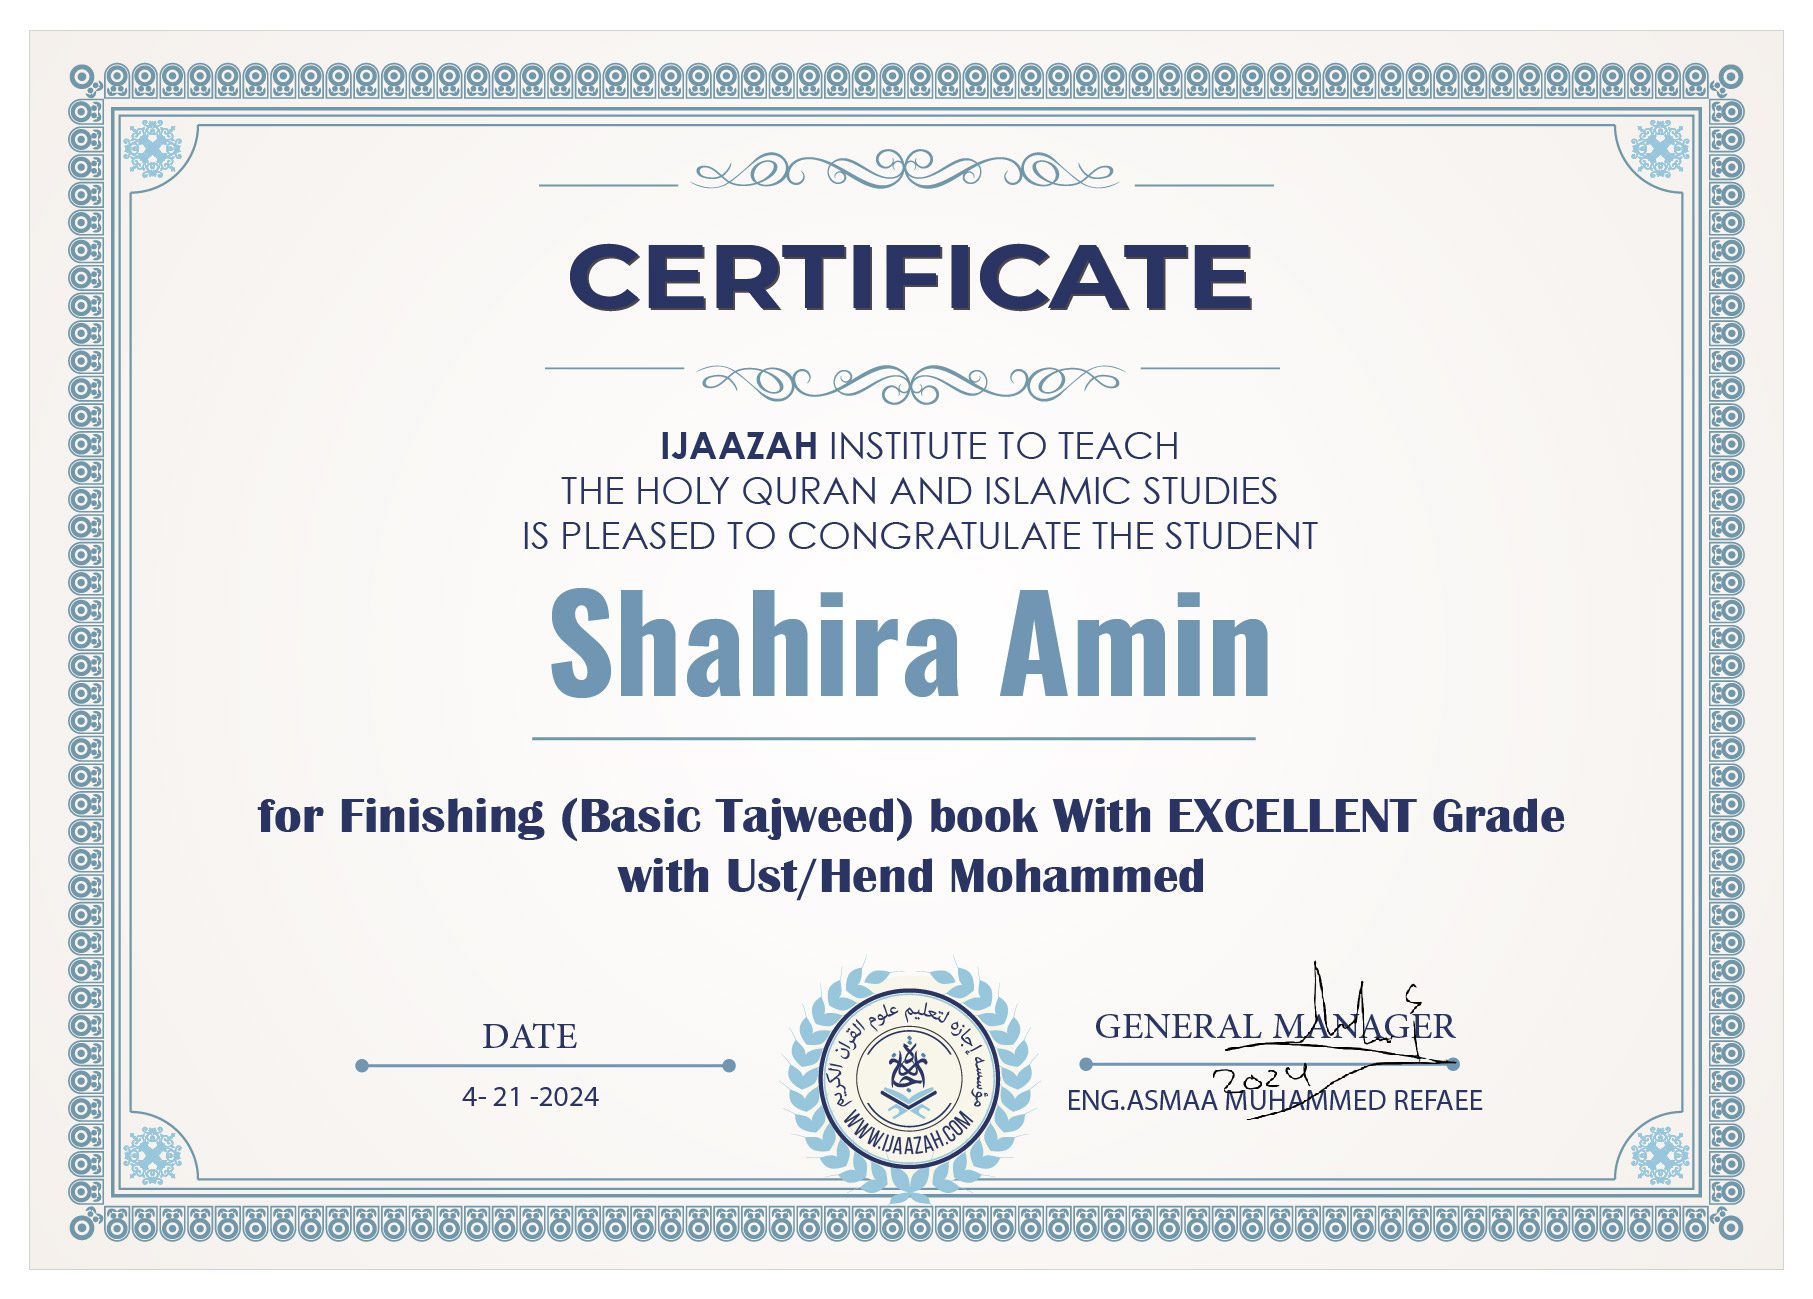 CERTIFICATE
IJAAZAH INSTITUTE TO TEACH THE HOLY QURAN AND ISLAMIC STUDIES IS PLEASED TO CONGRATULATE THE STUDENT
Shahira Amin
for Finishing (Basic Tajweed) book With EXCELLENT Grade with Ust/Hend Mohammed
DATE
4-21-2024
GENERAL MANAGER
ENG.ASMAA MUHAMMED REFAEE
(logo)
معهد إجازة لتعليم القرآن الكريم والدراسات الإسلامية
WWW.IJAAZAH.COM